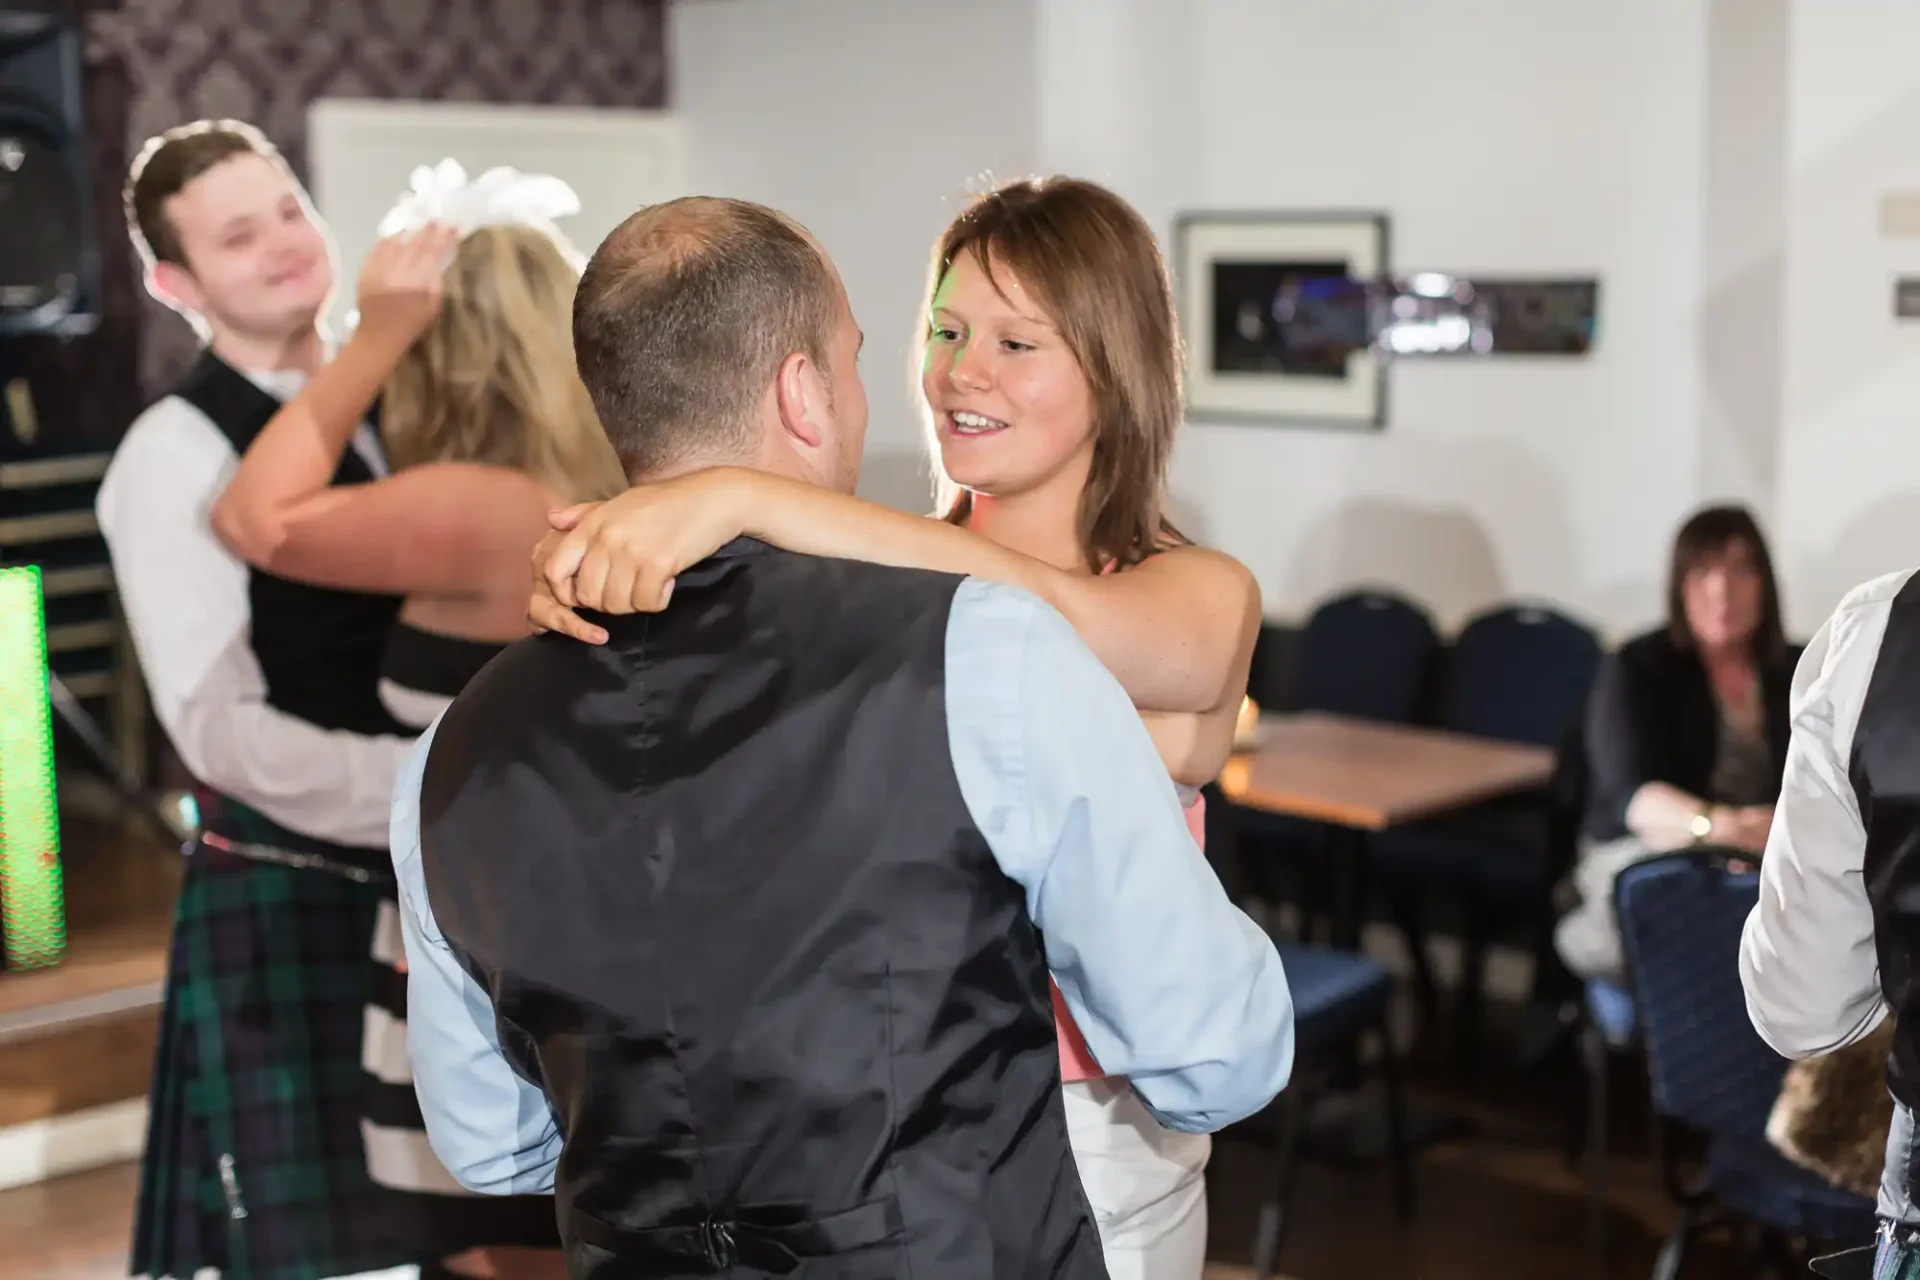 A couple dancing closely at an indoor event, with other guests and a man in a kilt visible in the background.